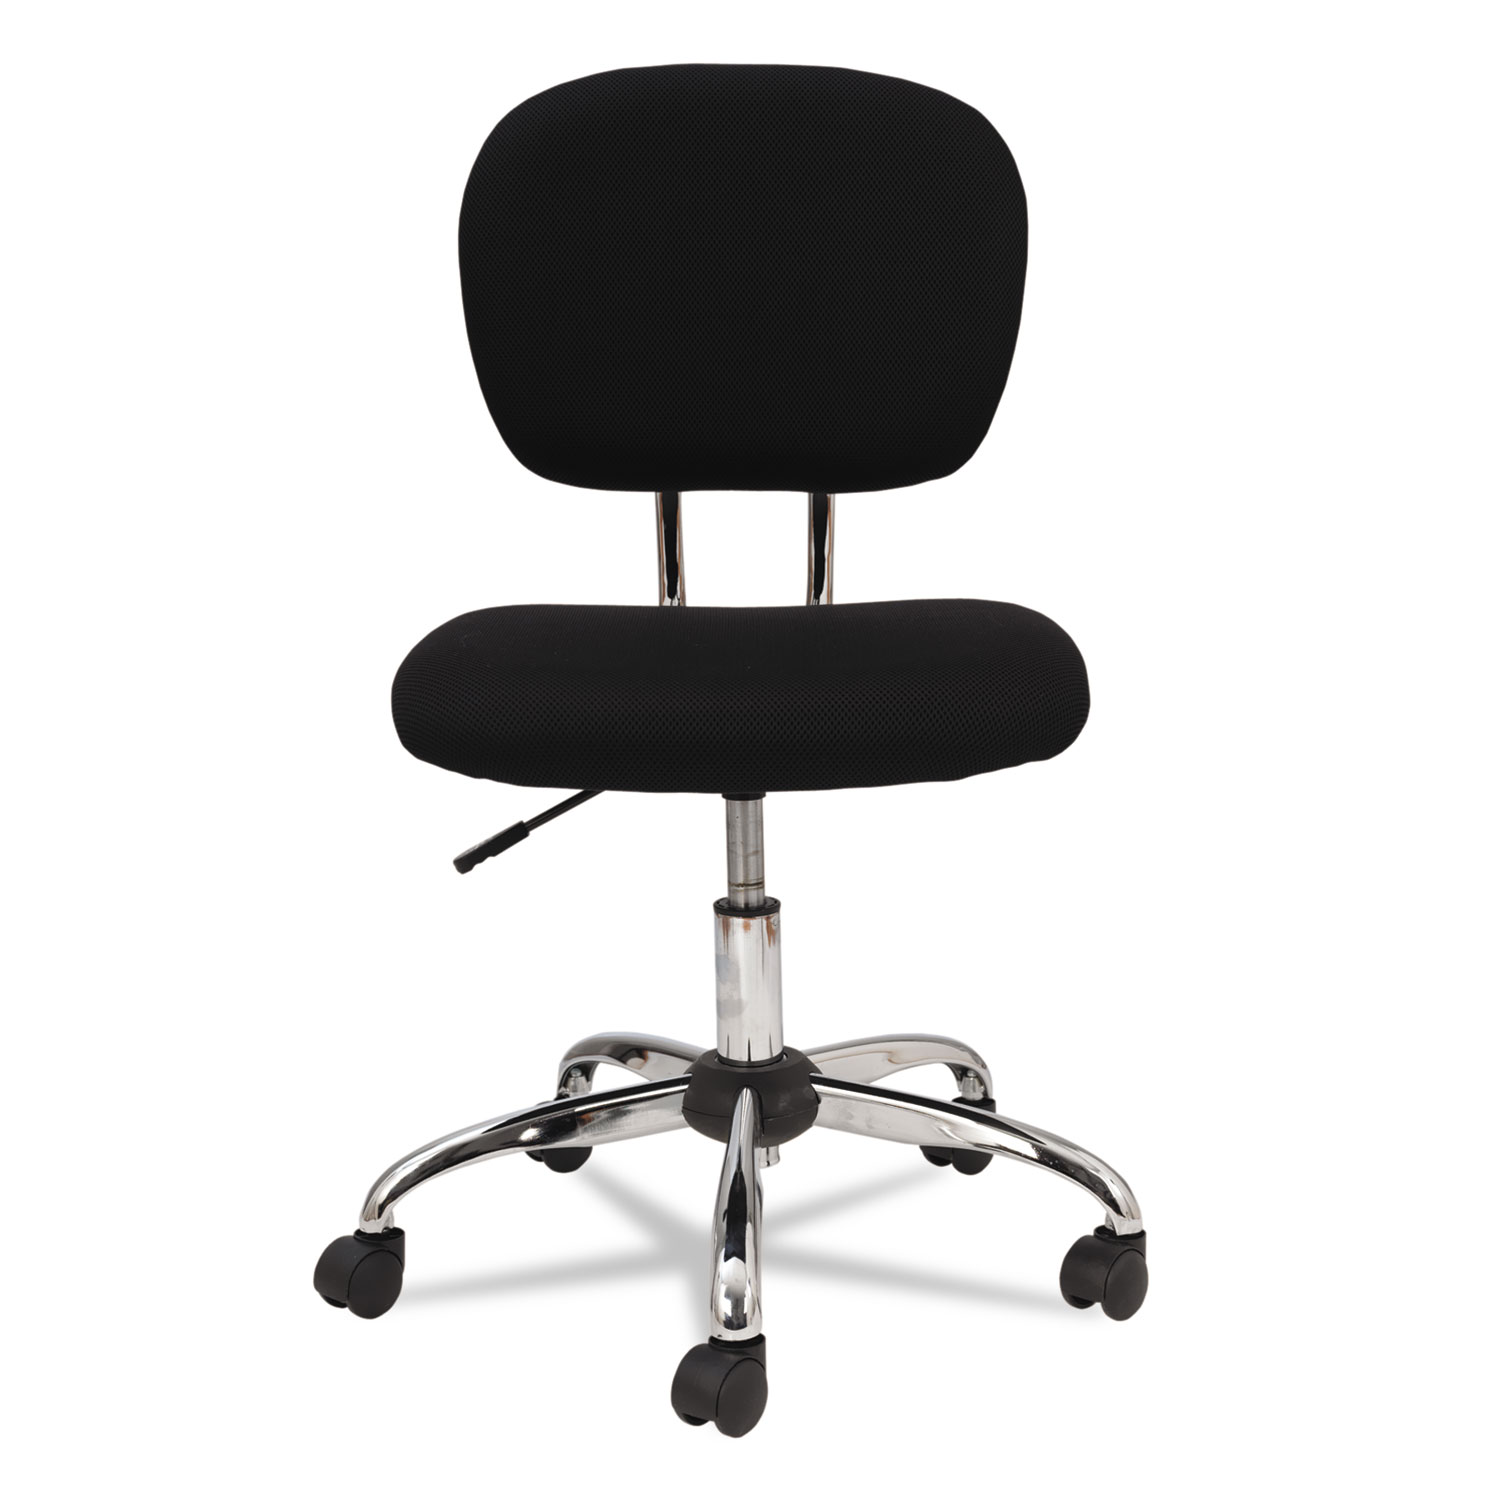 Mesh Task Chair, Supports up to 250 lbs., Black Seat/Black Back, Chrome Base